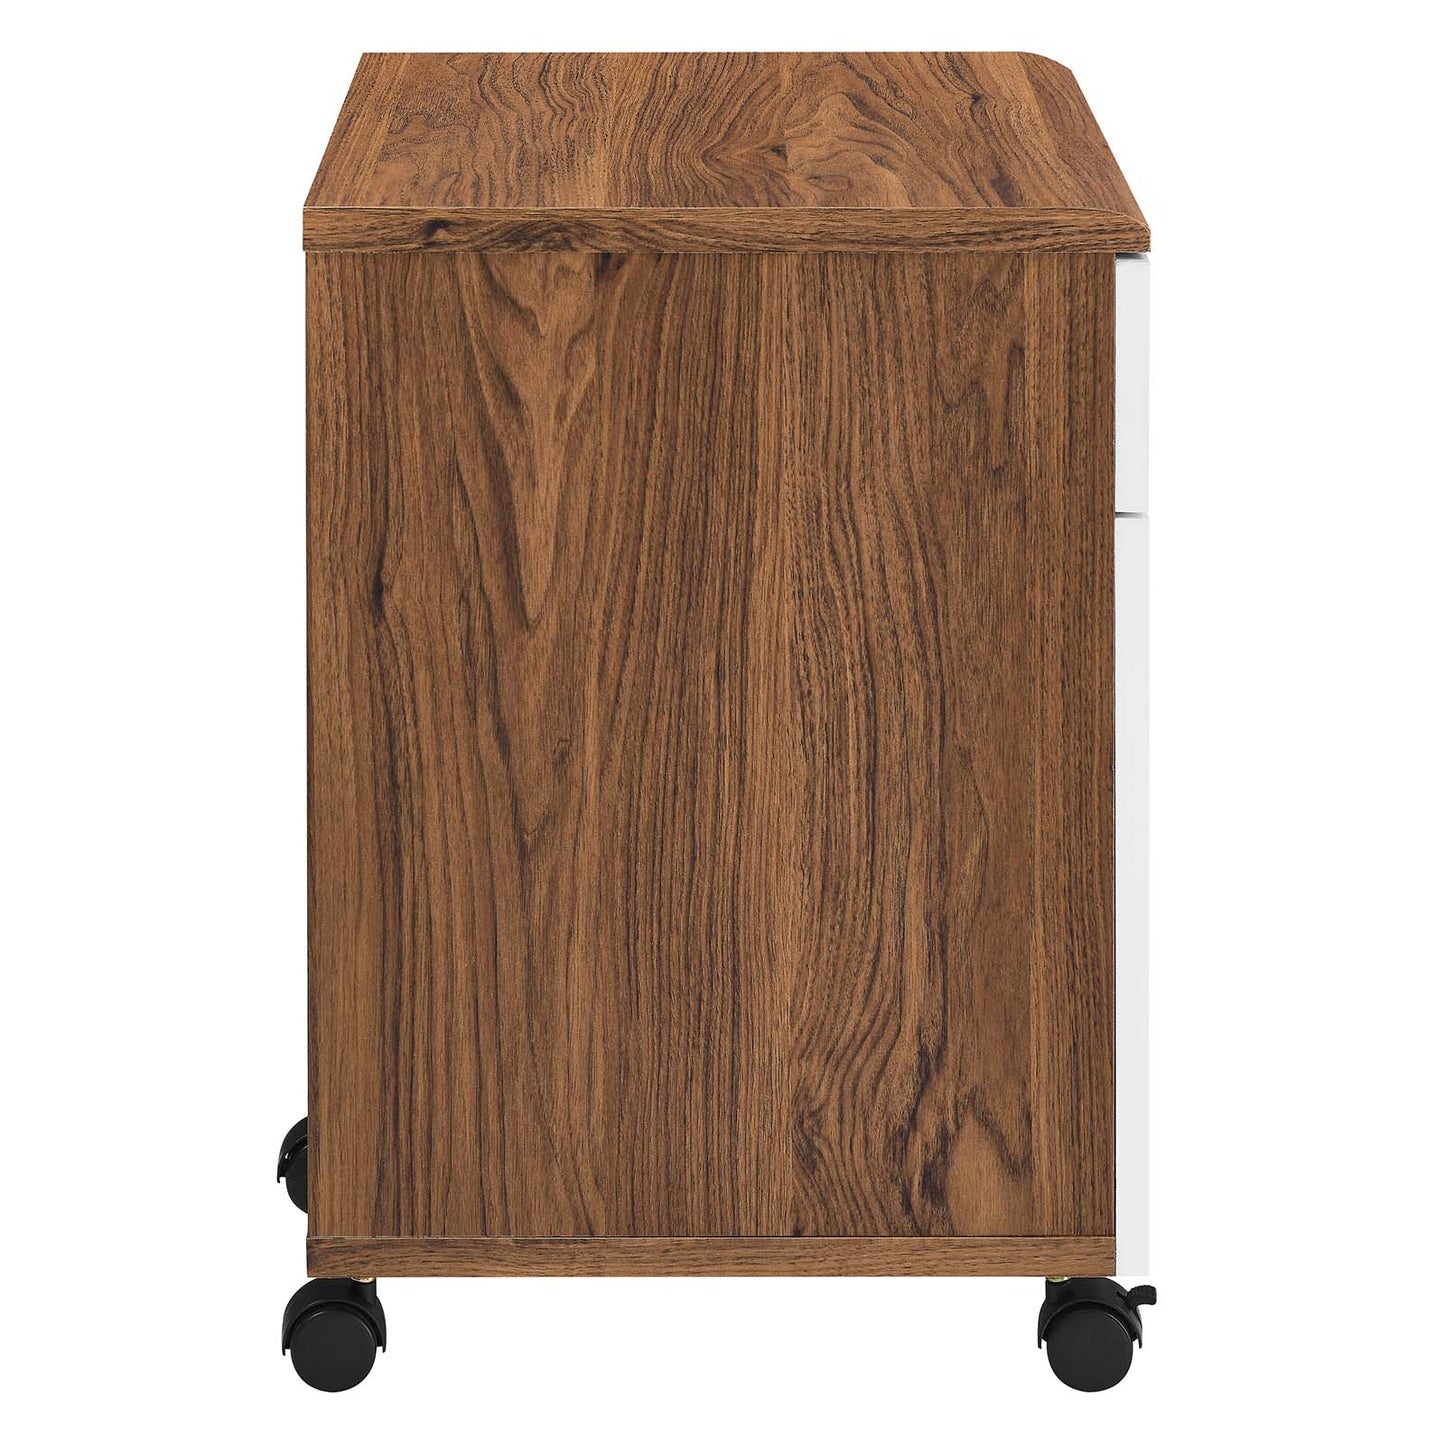 Envision Wood File Cabinet